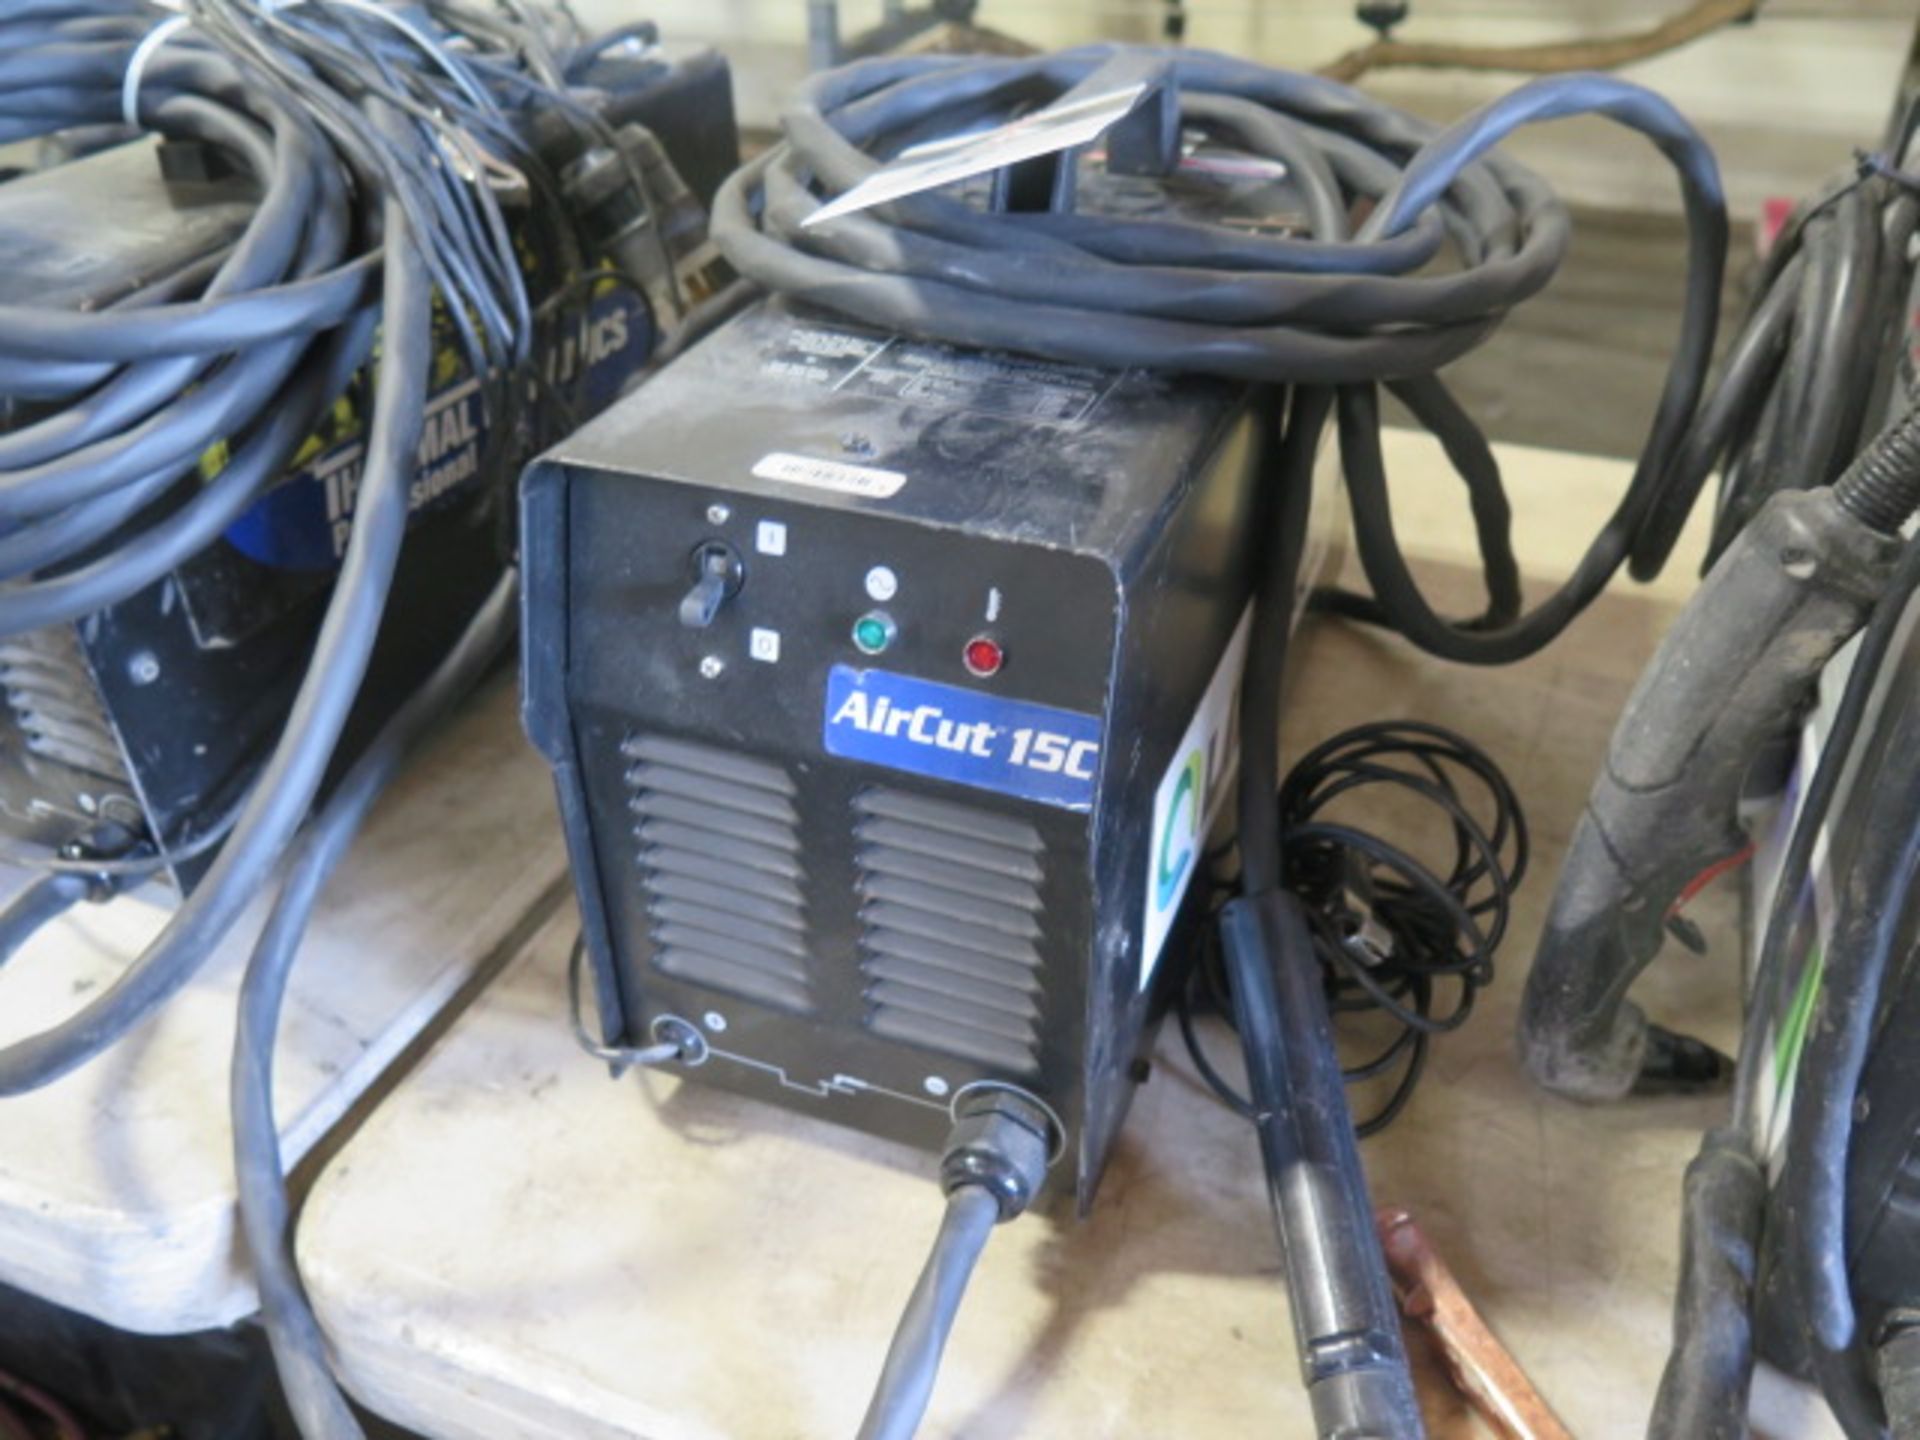 Thermal Dynamics AirCut 15 Plasma Cutting Power Source (SOLD AS-IS - NO WARRANTY)